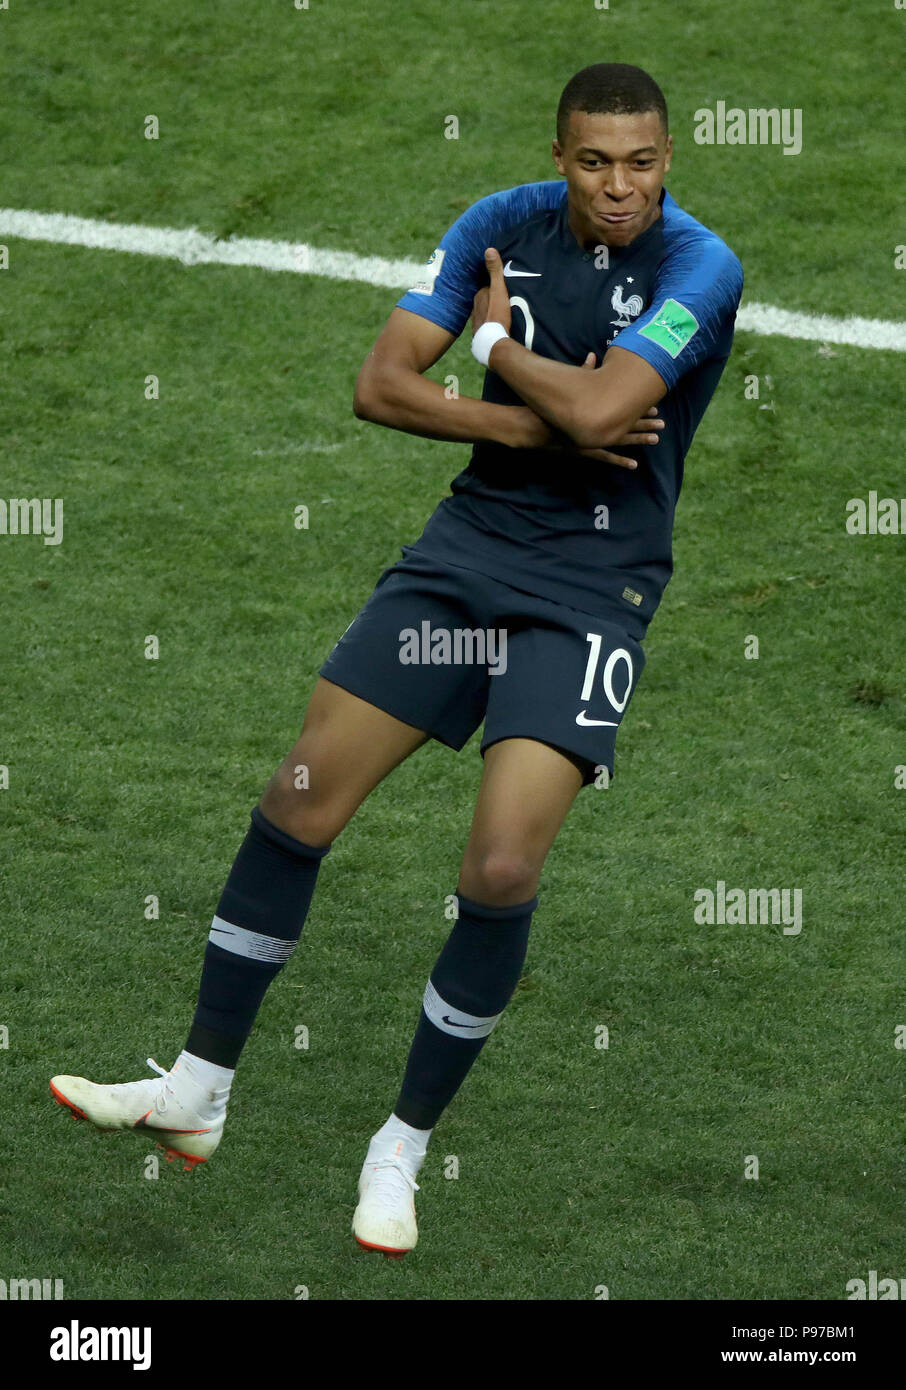 (180715) -- MOSCOW, July 15, 2018 (Xinhua) -- Kylian Mbappe of France celebrates scoring during the 2018 FIFA World Cup final match between France and Croatia in Moscow, Russia, July 15, 2018. (Xinhua/Wu Zhuang) Stock Photo